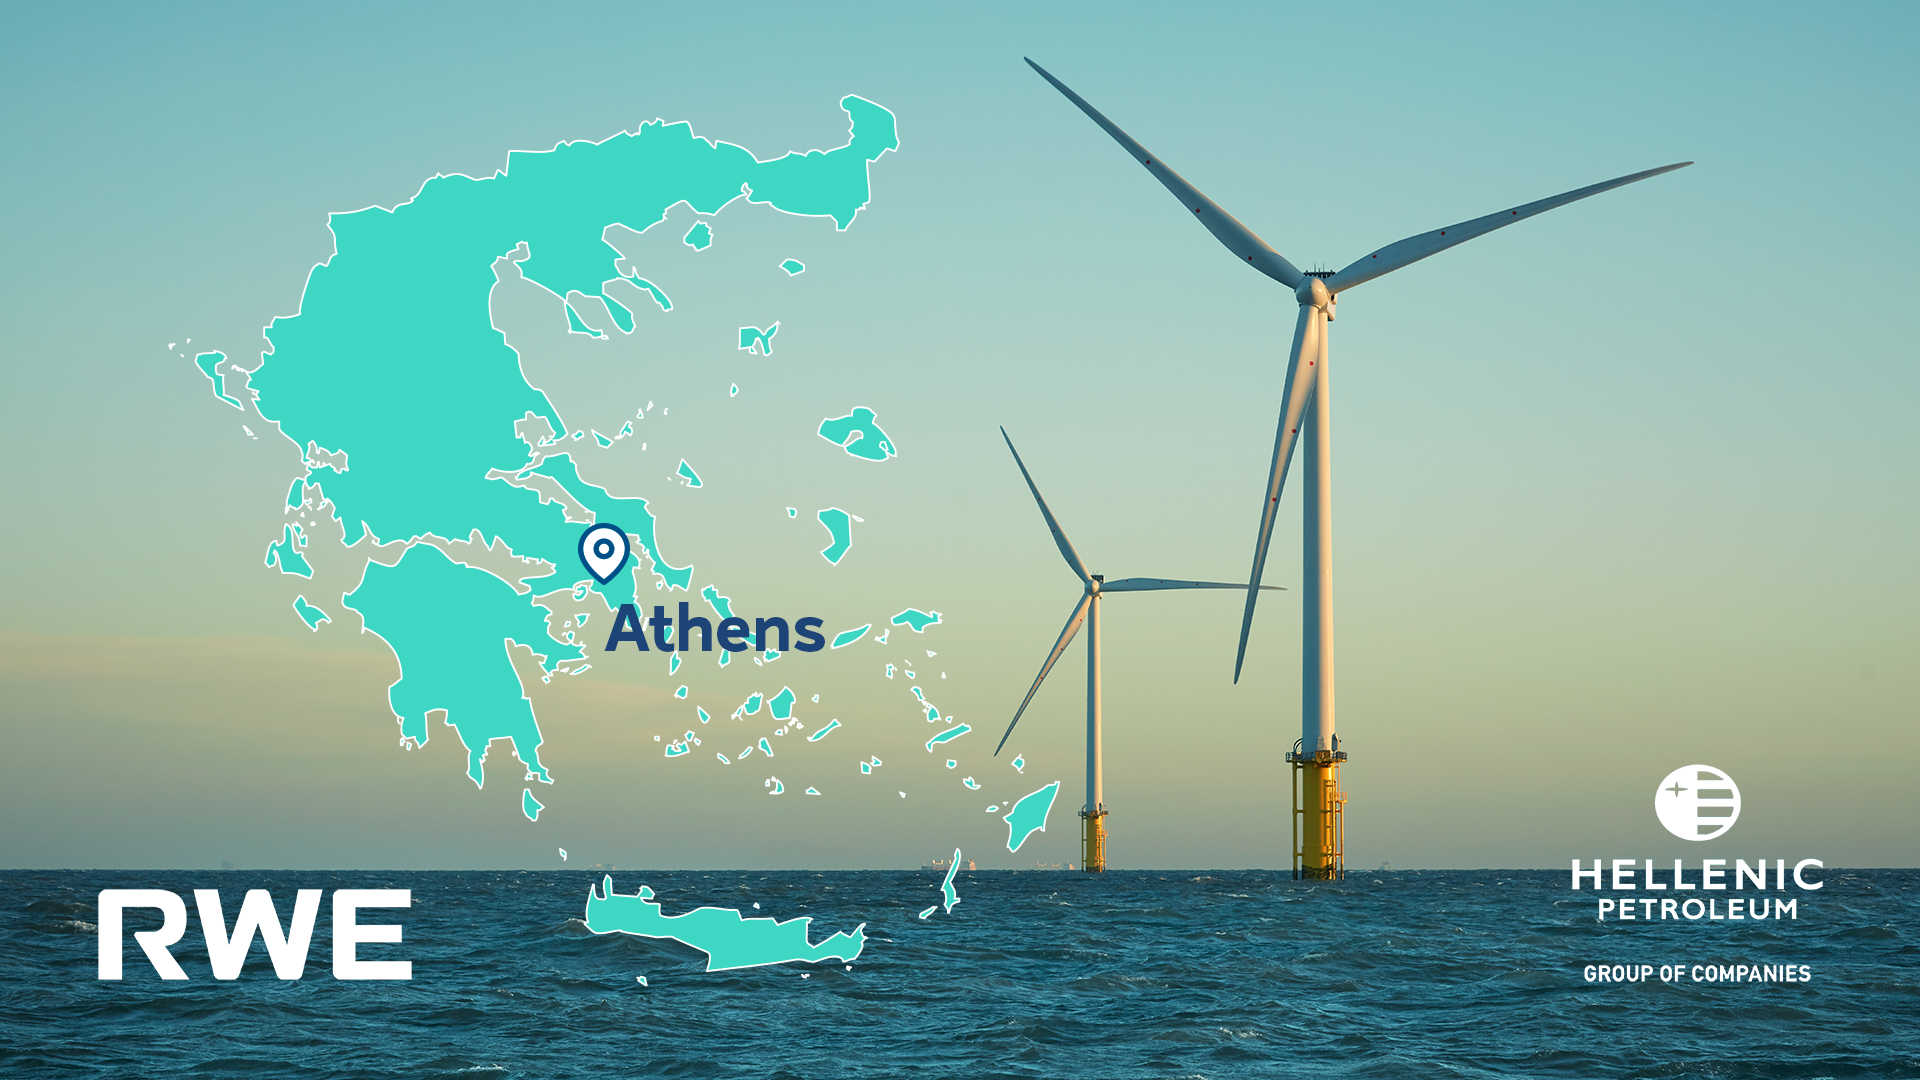 RWE and Hellenic Petroleum join forces to develop offshore wind in Greece